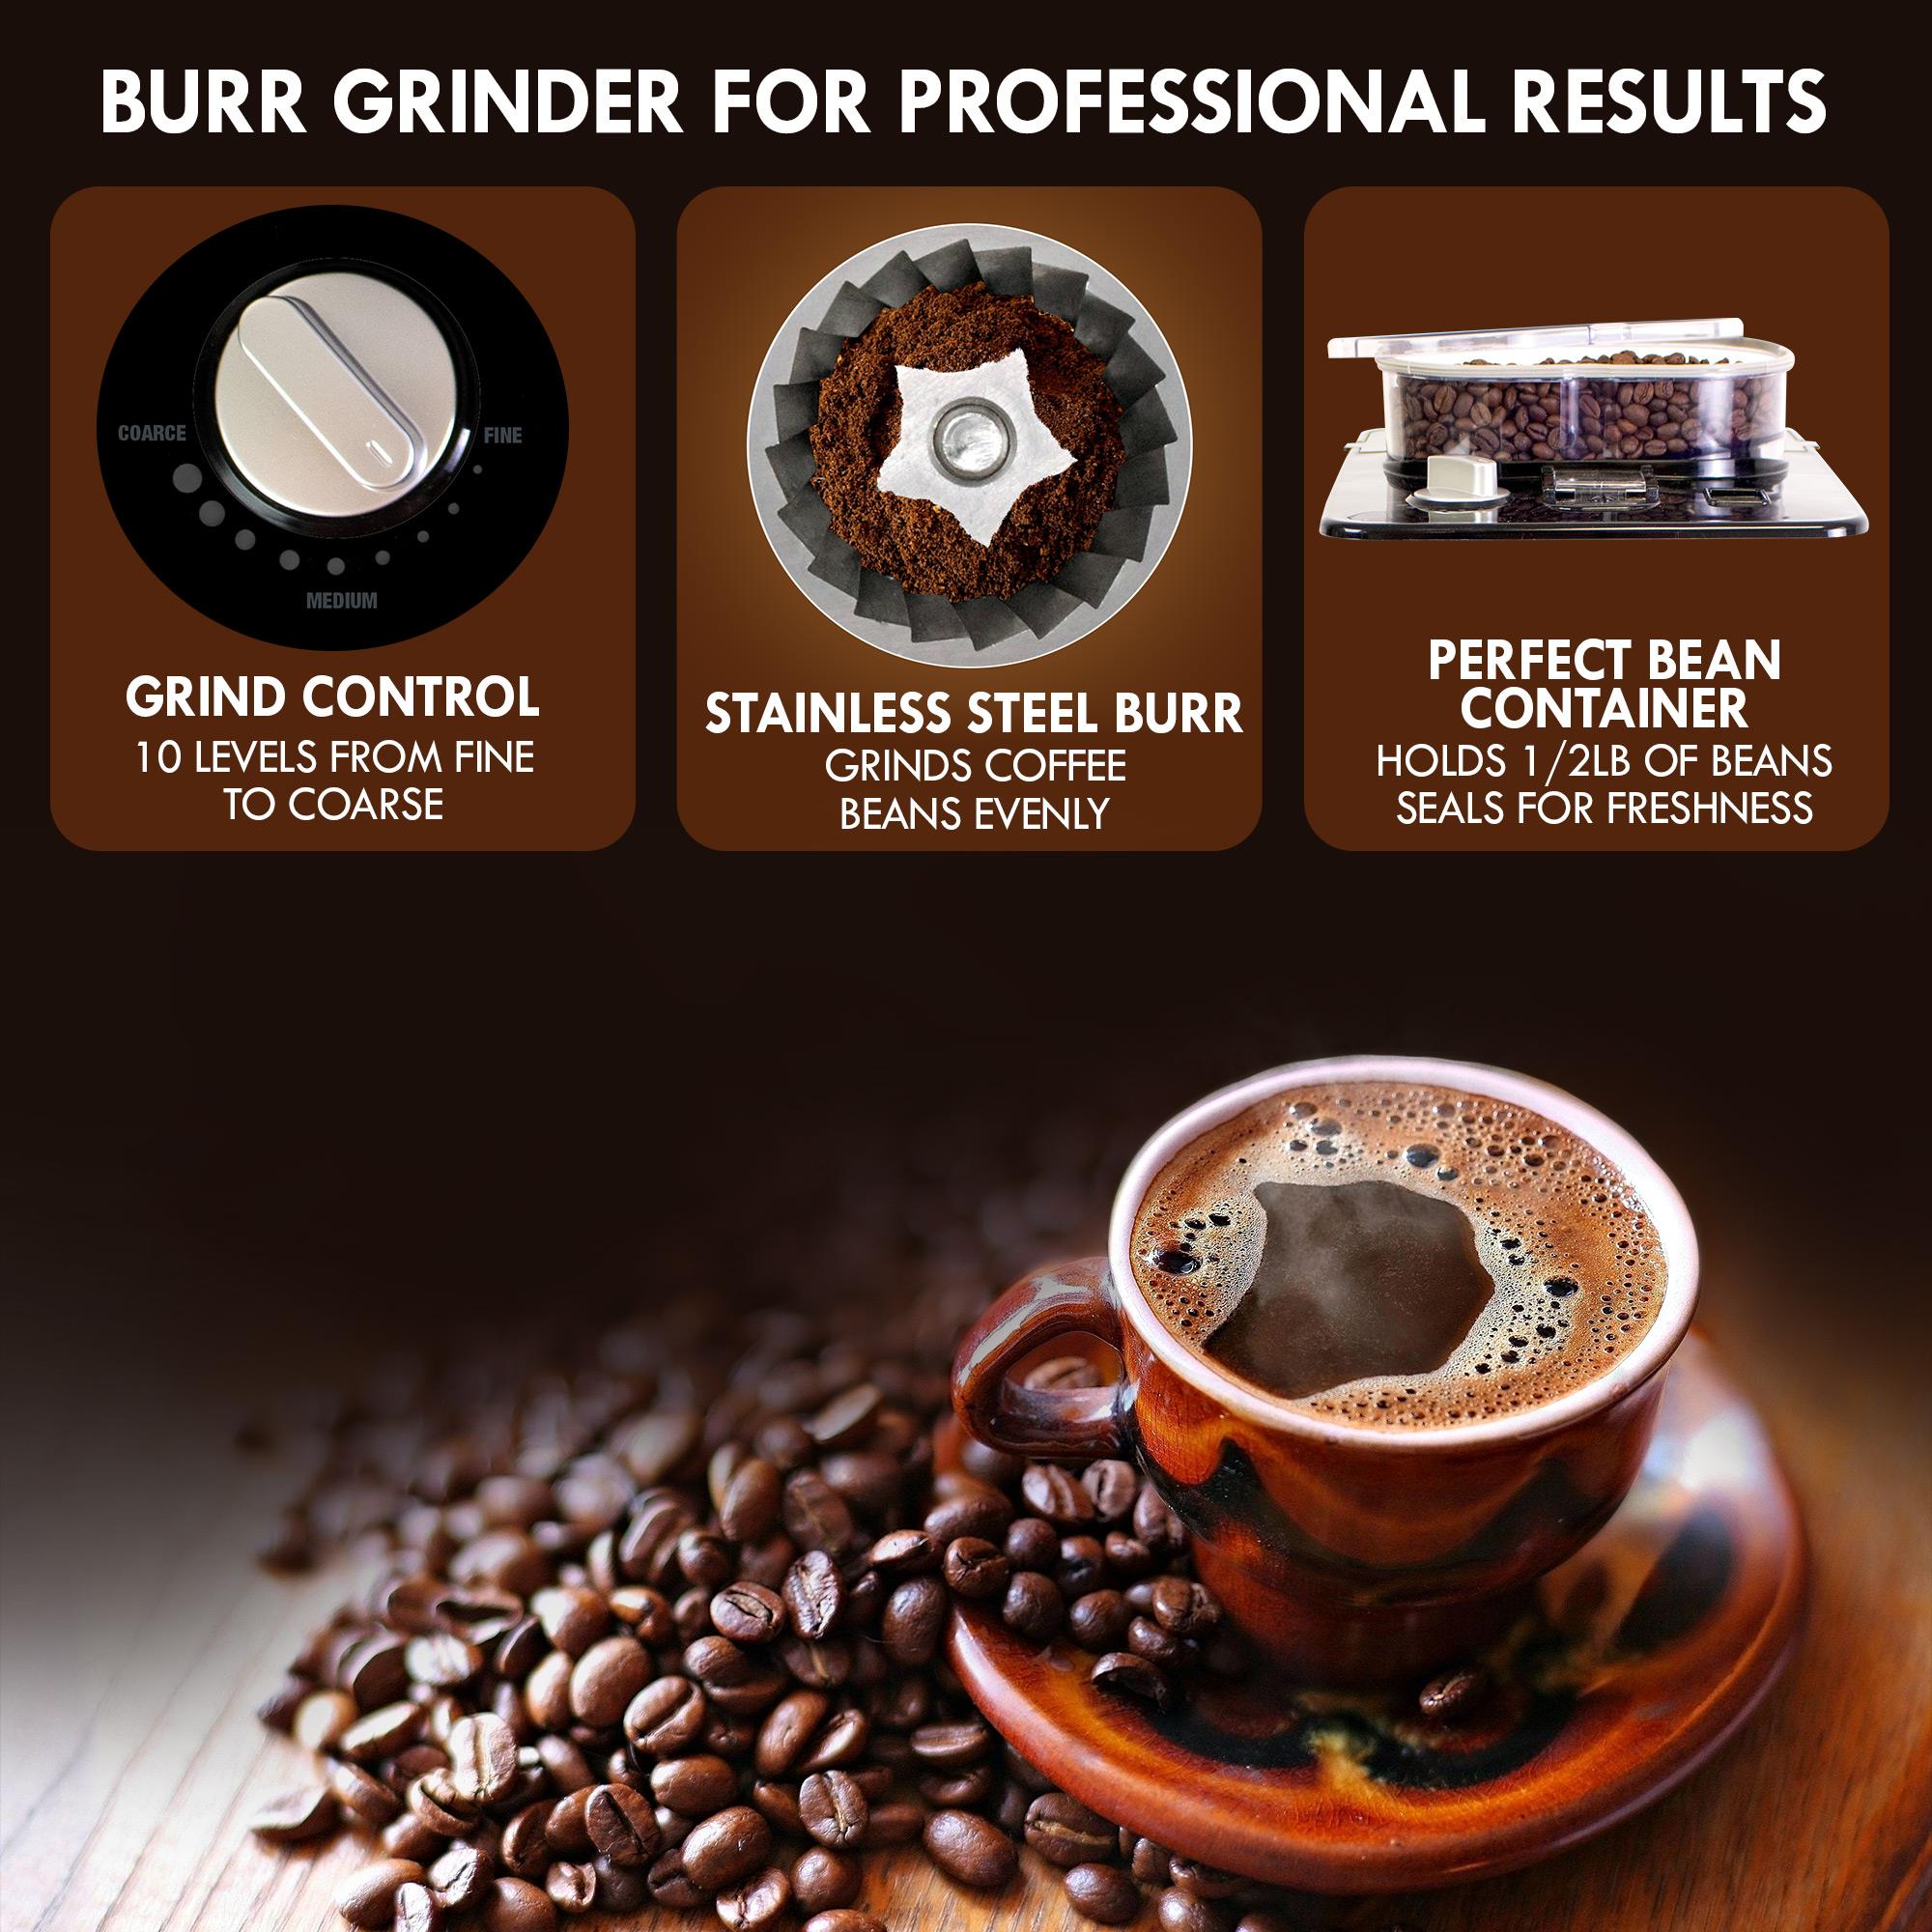 Mr. Coffee Burr Coffee Grinder, Automatic Grinder with 18 Presets for  French Press, Drip Coffee, and Espresso, 18-Cup Capacity, Stainless Steel